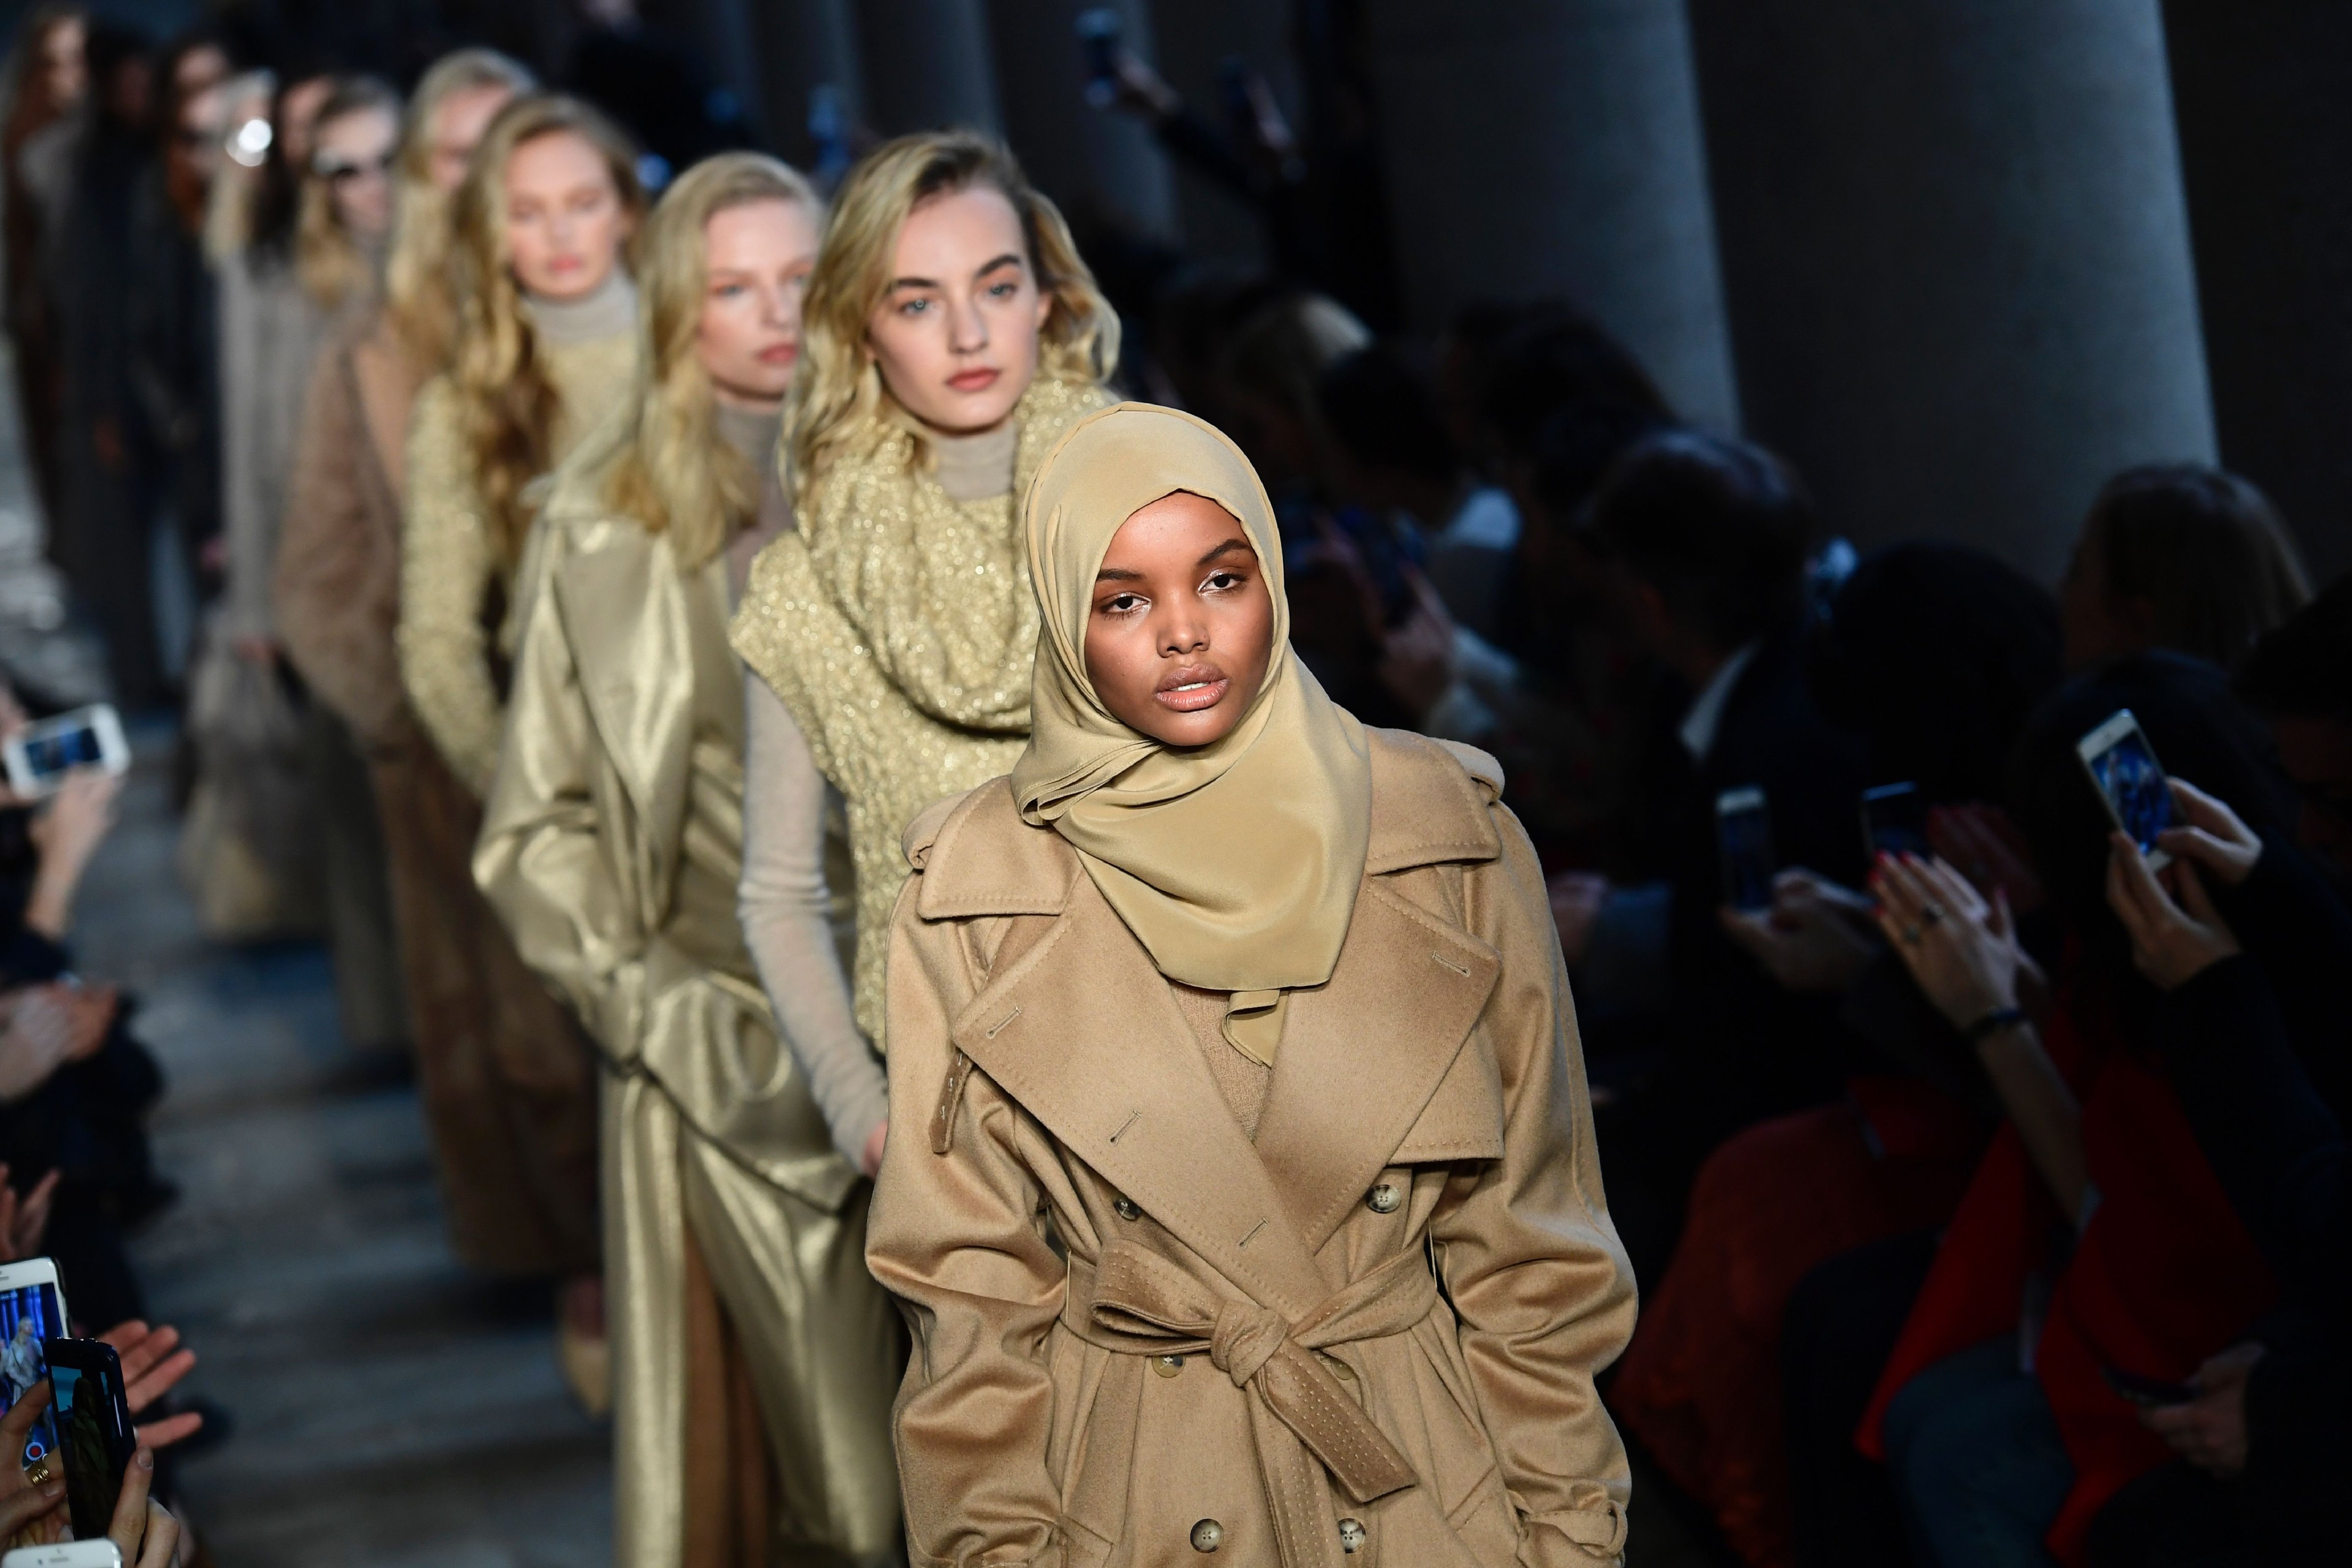 Somalian model Halima Aden presents a creation for fashion house Max Mara during the Women's Fall/Winter 2017/2018 fashion week in Milan, on February 23, 2017. (Miguel Medina&mdash;AFP/Getty Images)